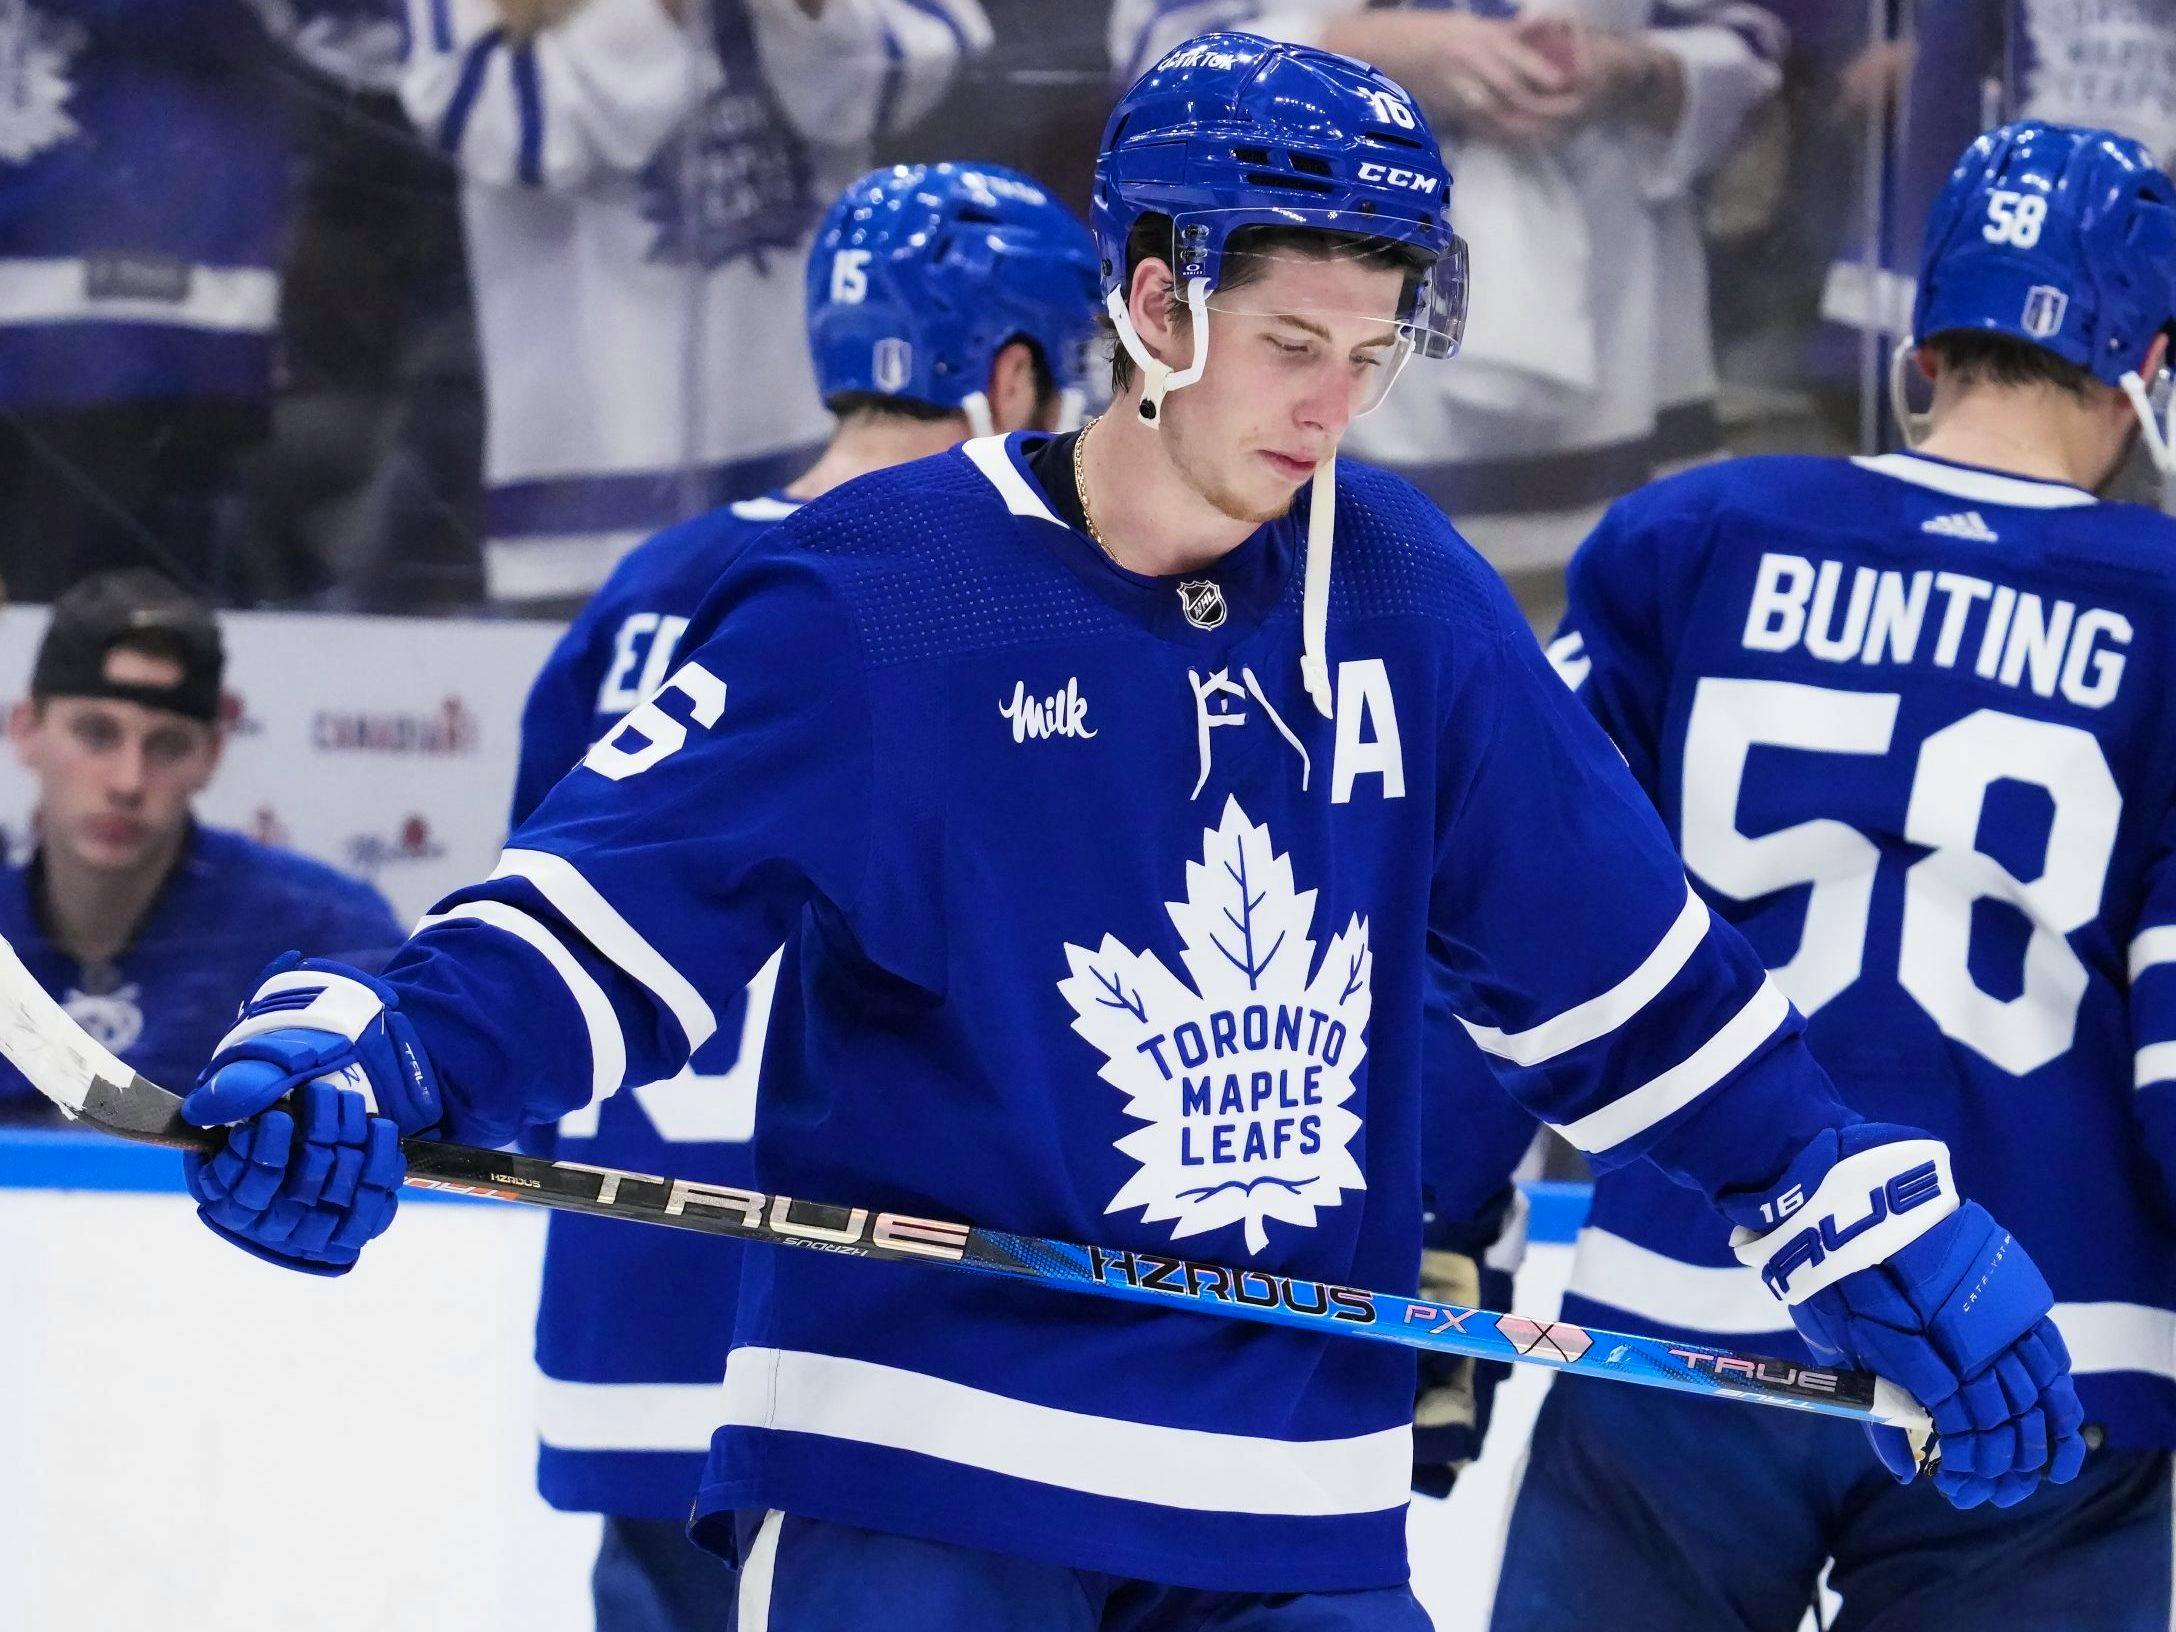 Marner excited at thought of joining Maple Leafs